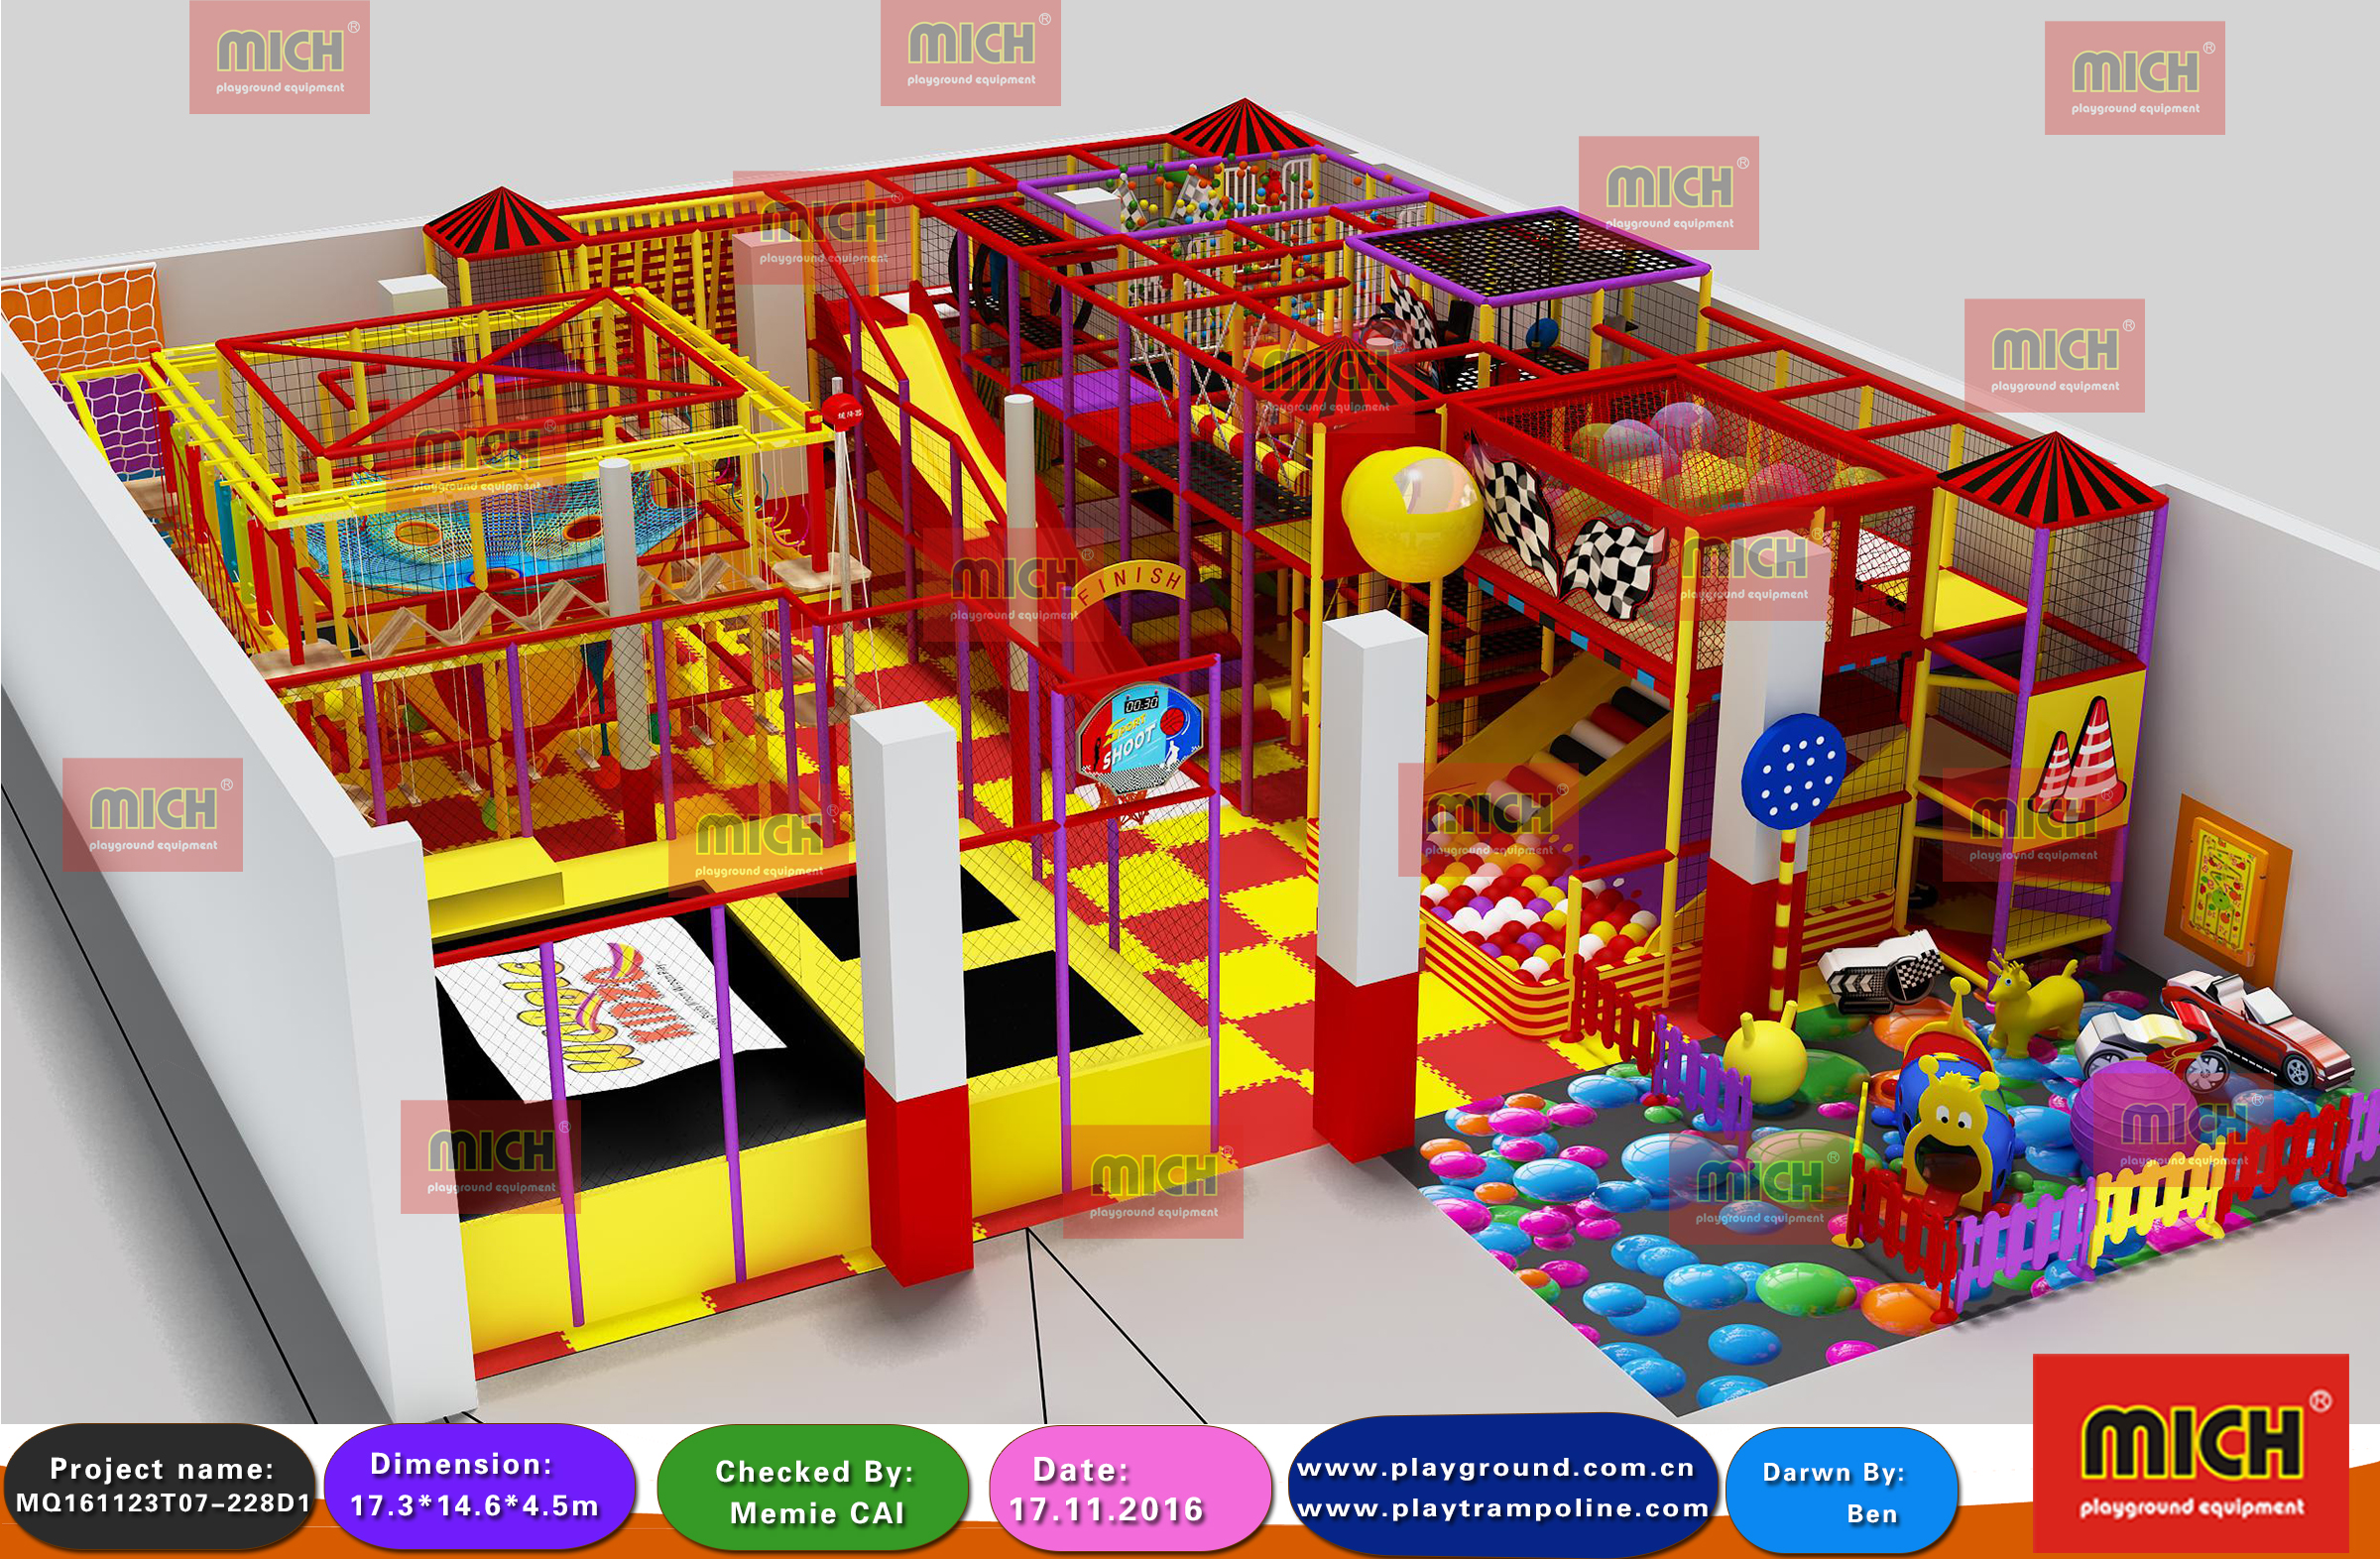 A New Kids Indoor Play Center Project in India